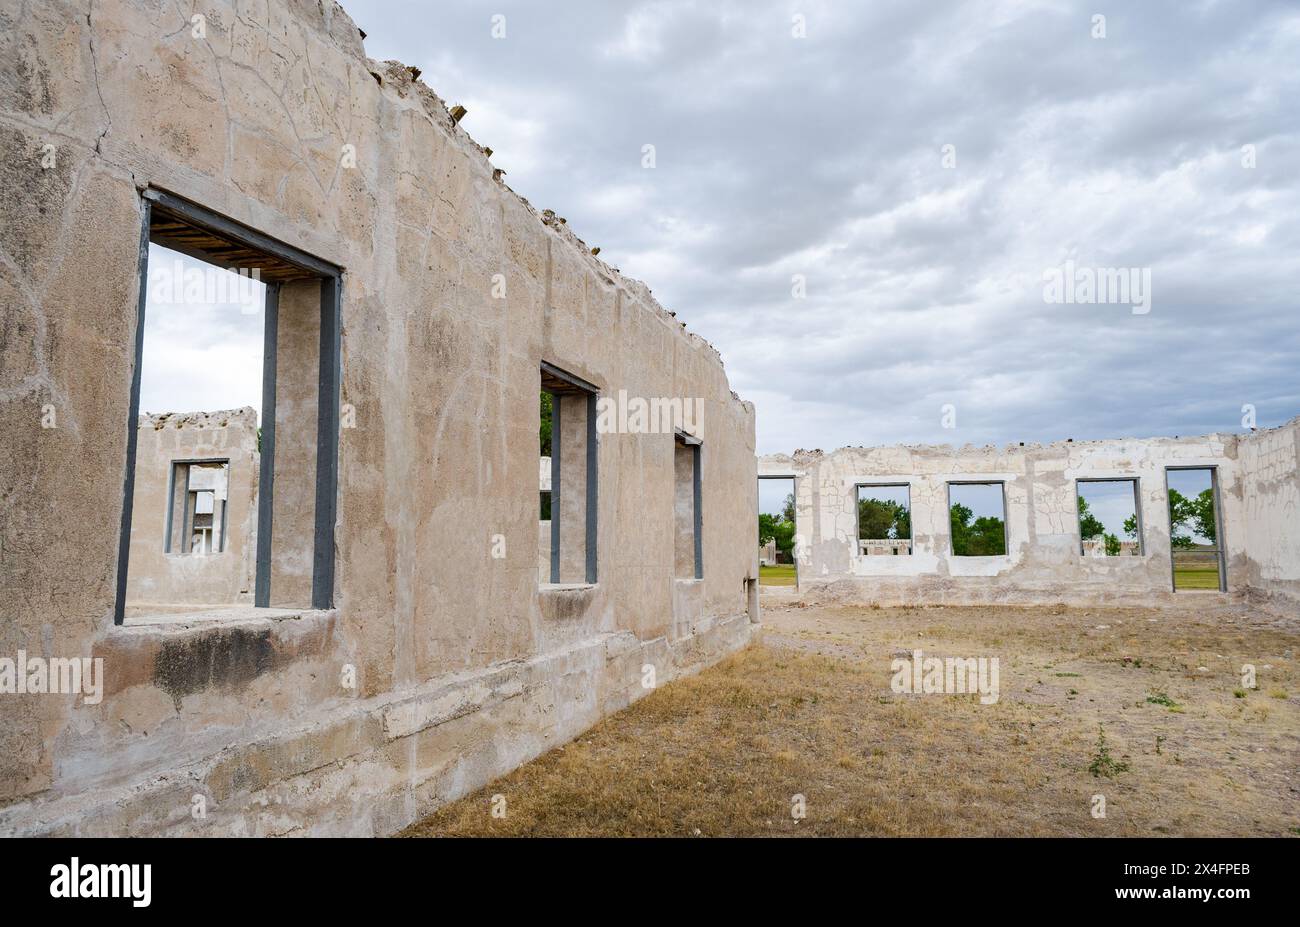 Fort Laramie National Historic Site, Trading Post, Diplomatic Site e Military Installation in Wyoming, USA Foto Stock